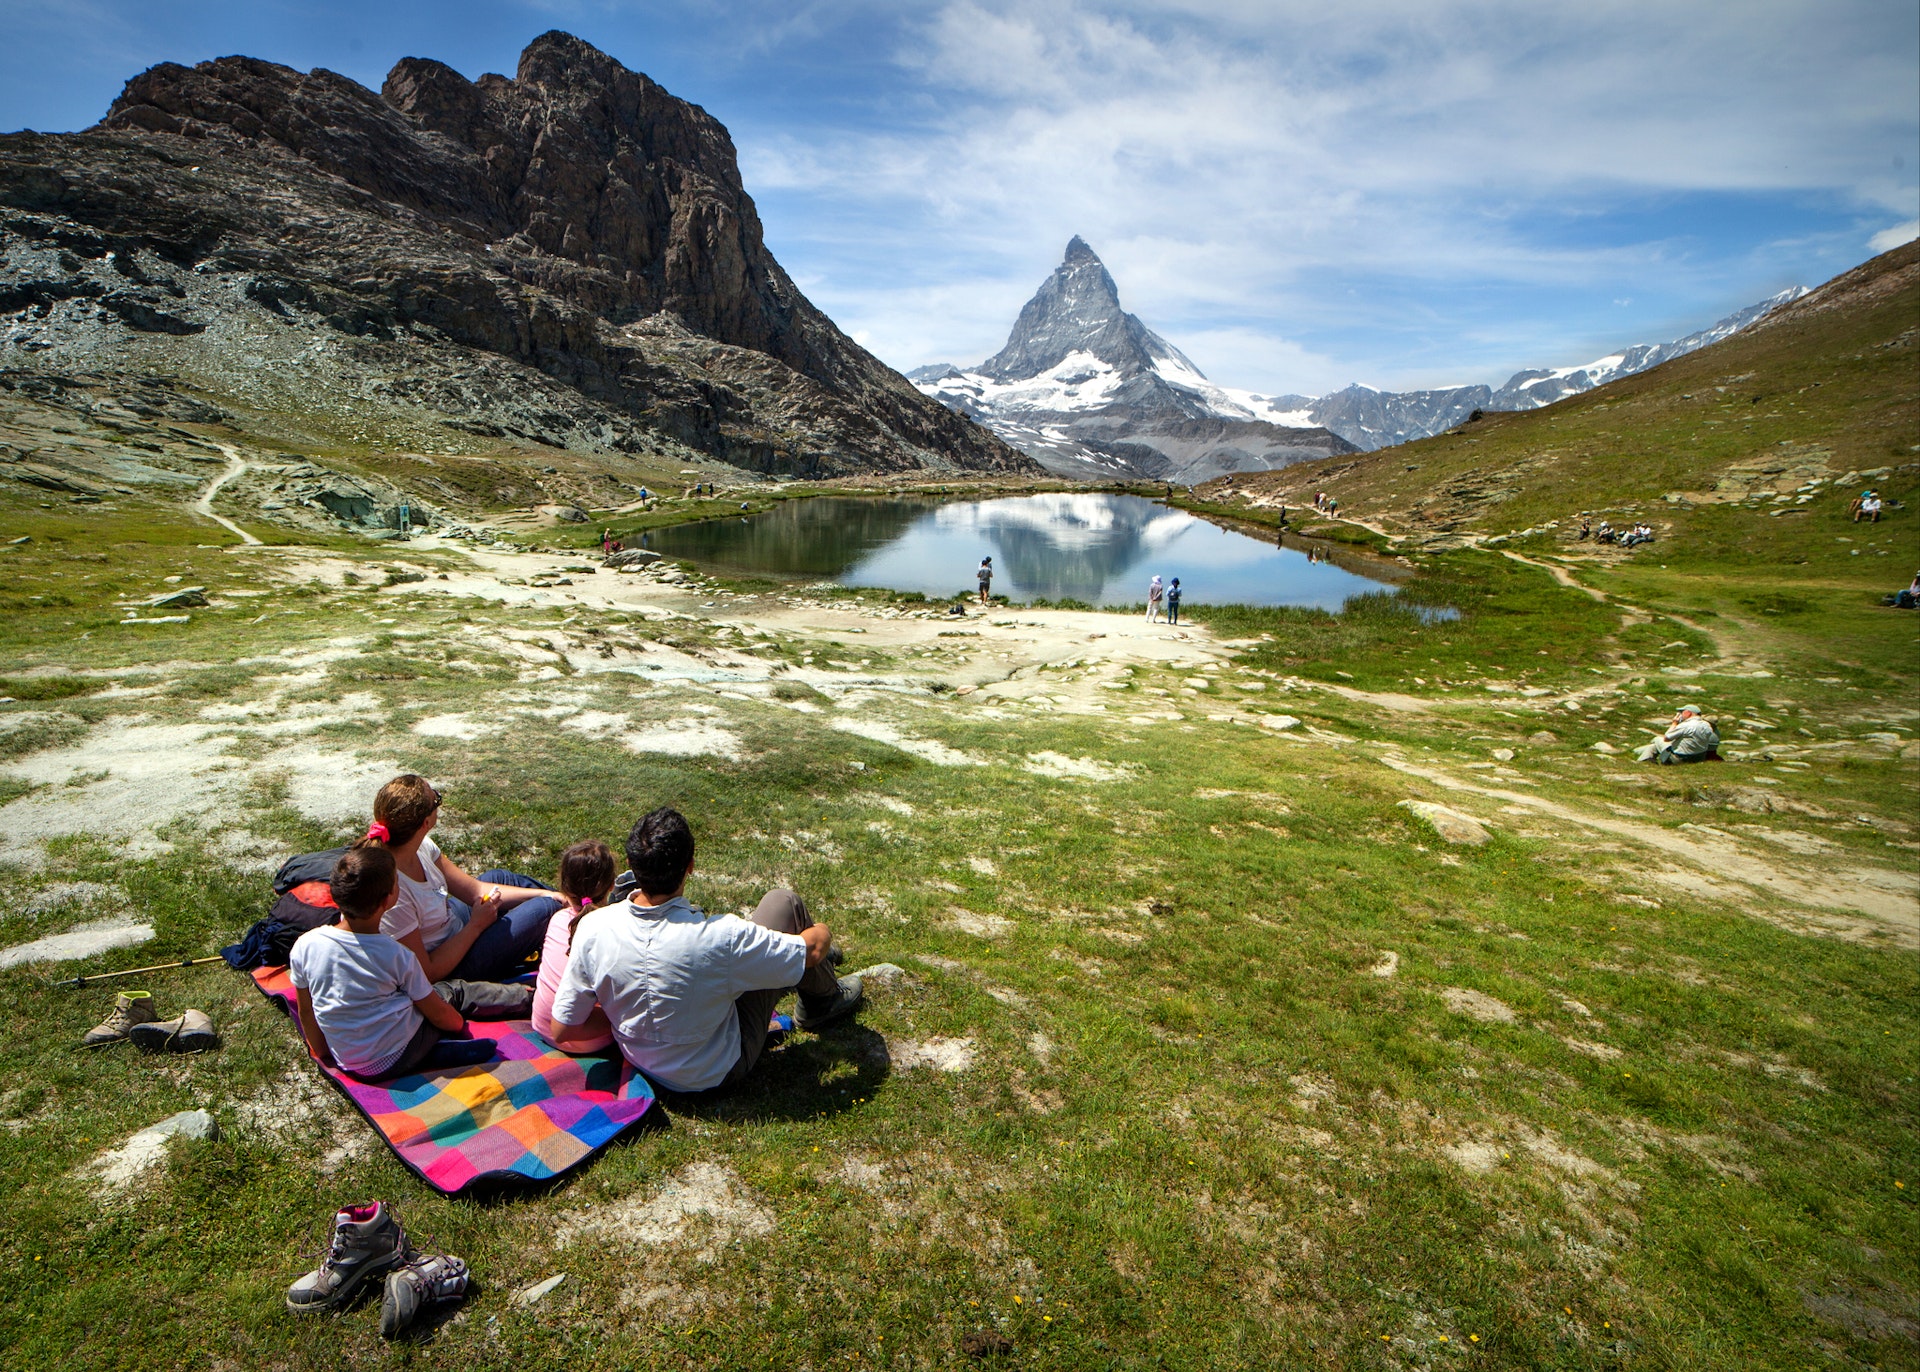 A family of four is having fun relaxing on the lawn in front of the Matterhorn.